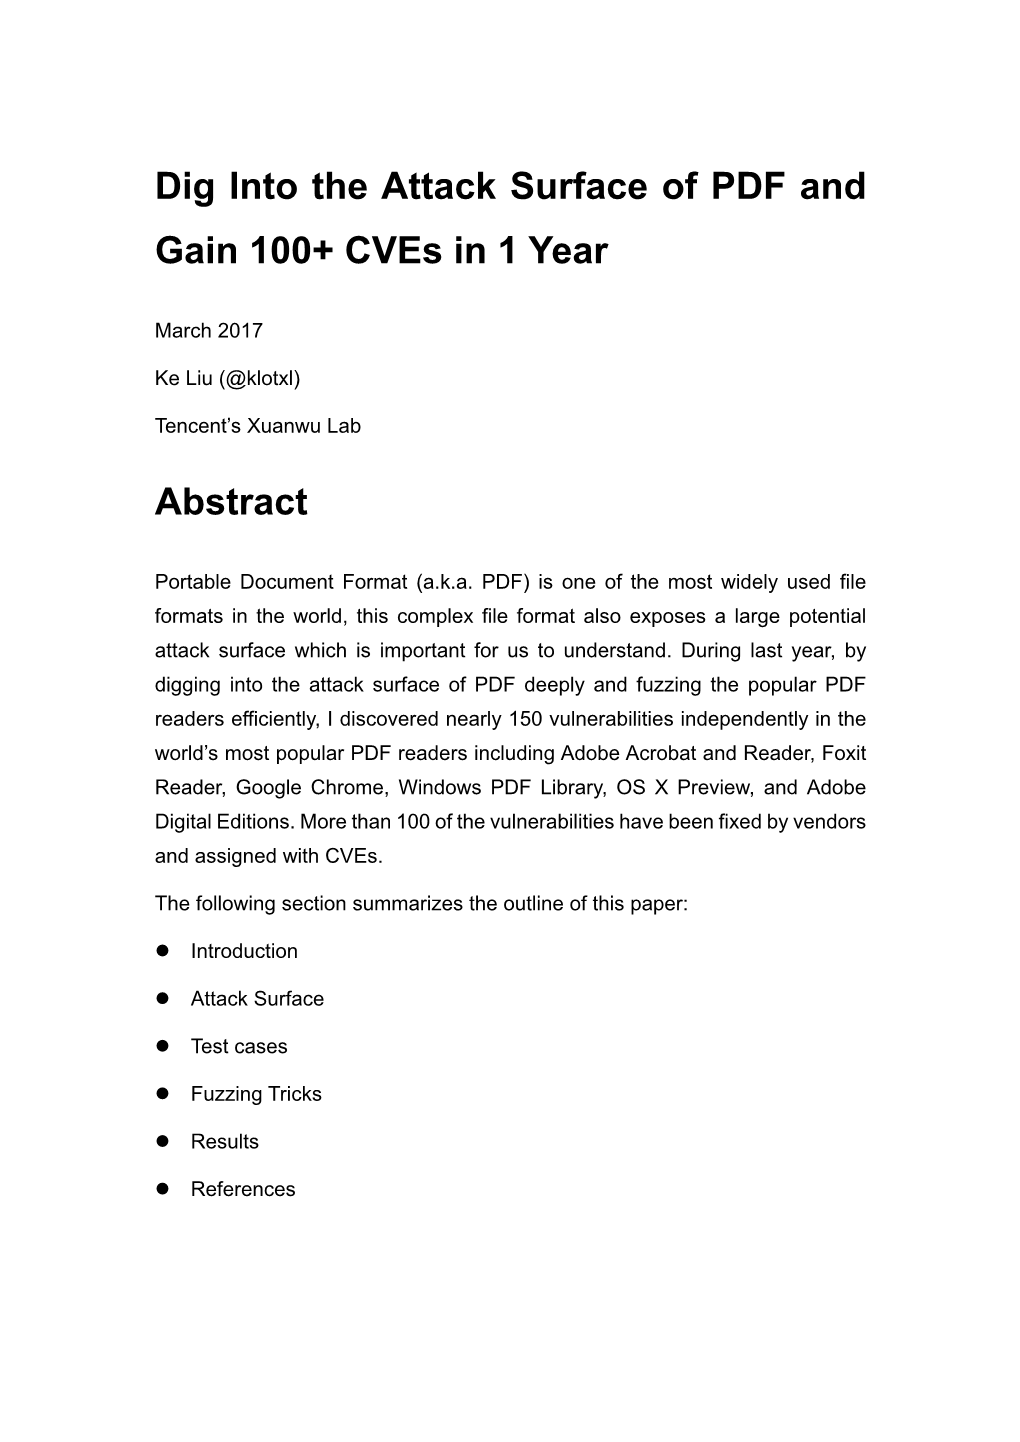 Dig Into the Attack Surface of PDF and Gain 100+ Cves in 1 Year